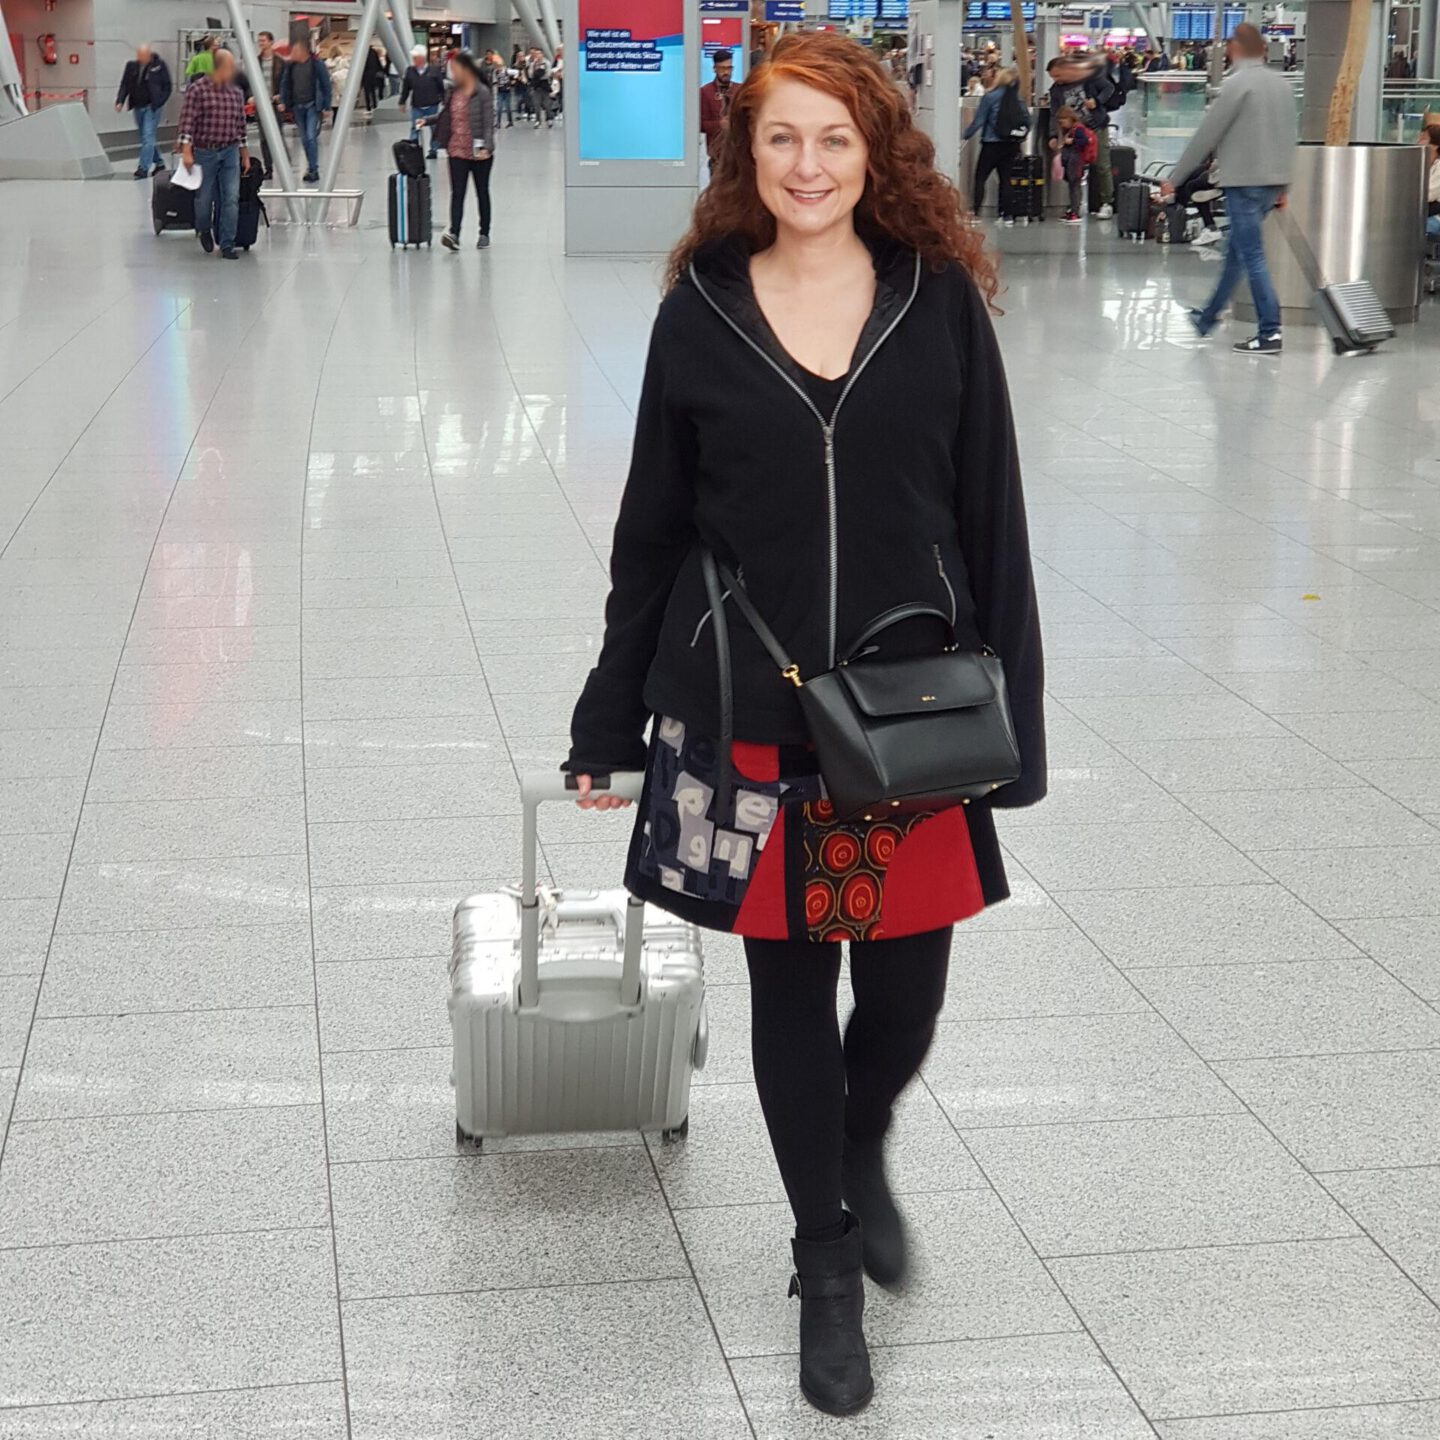 Travelling light and in style - packing light tips from a fashionista